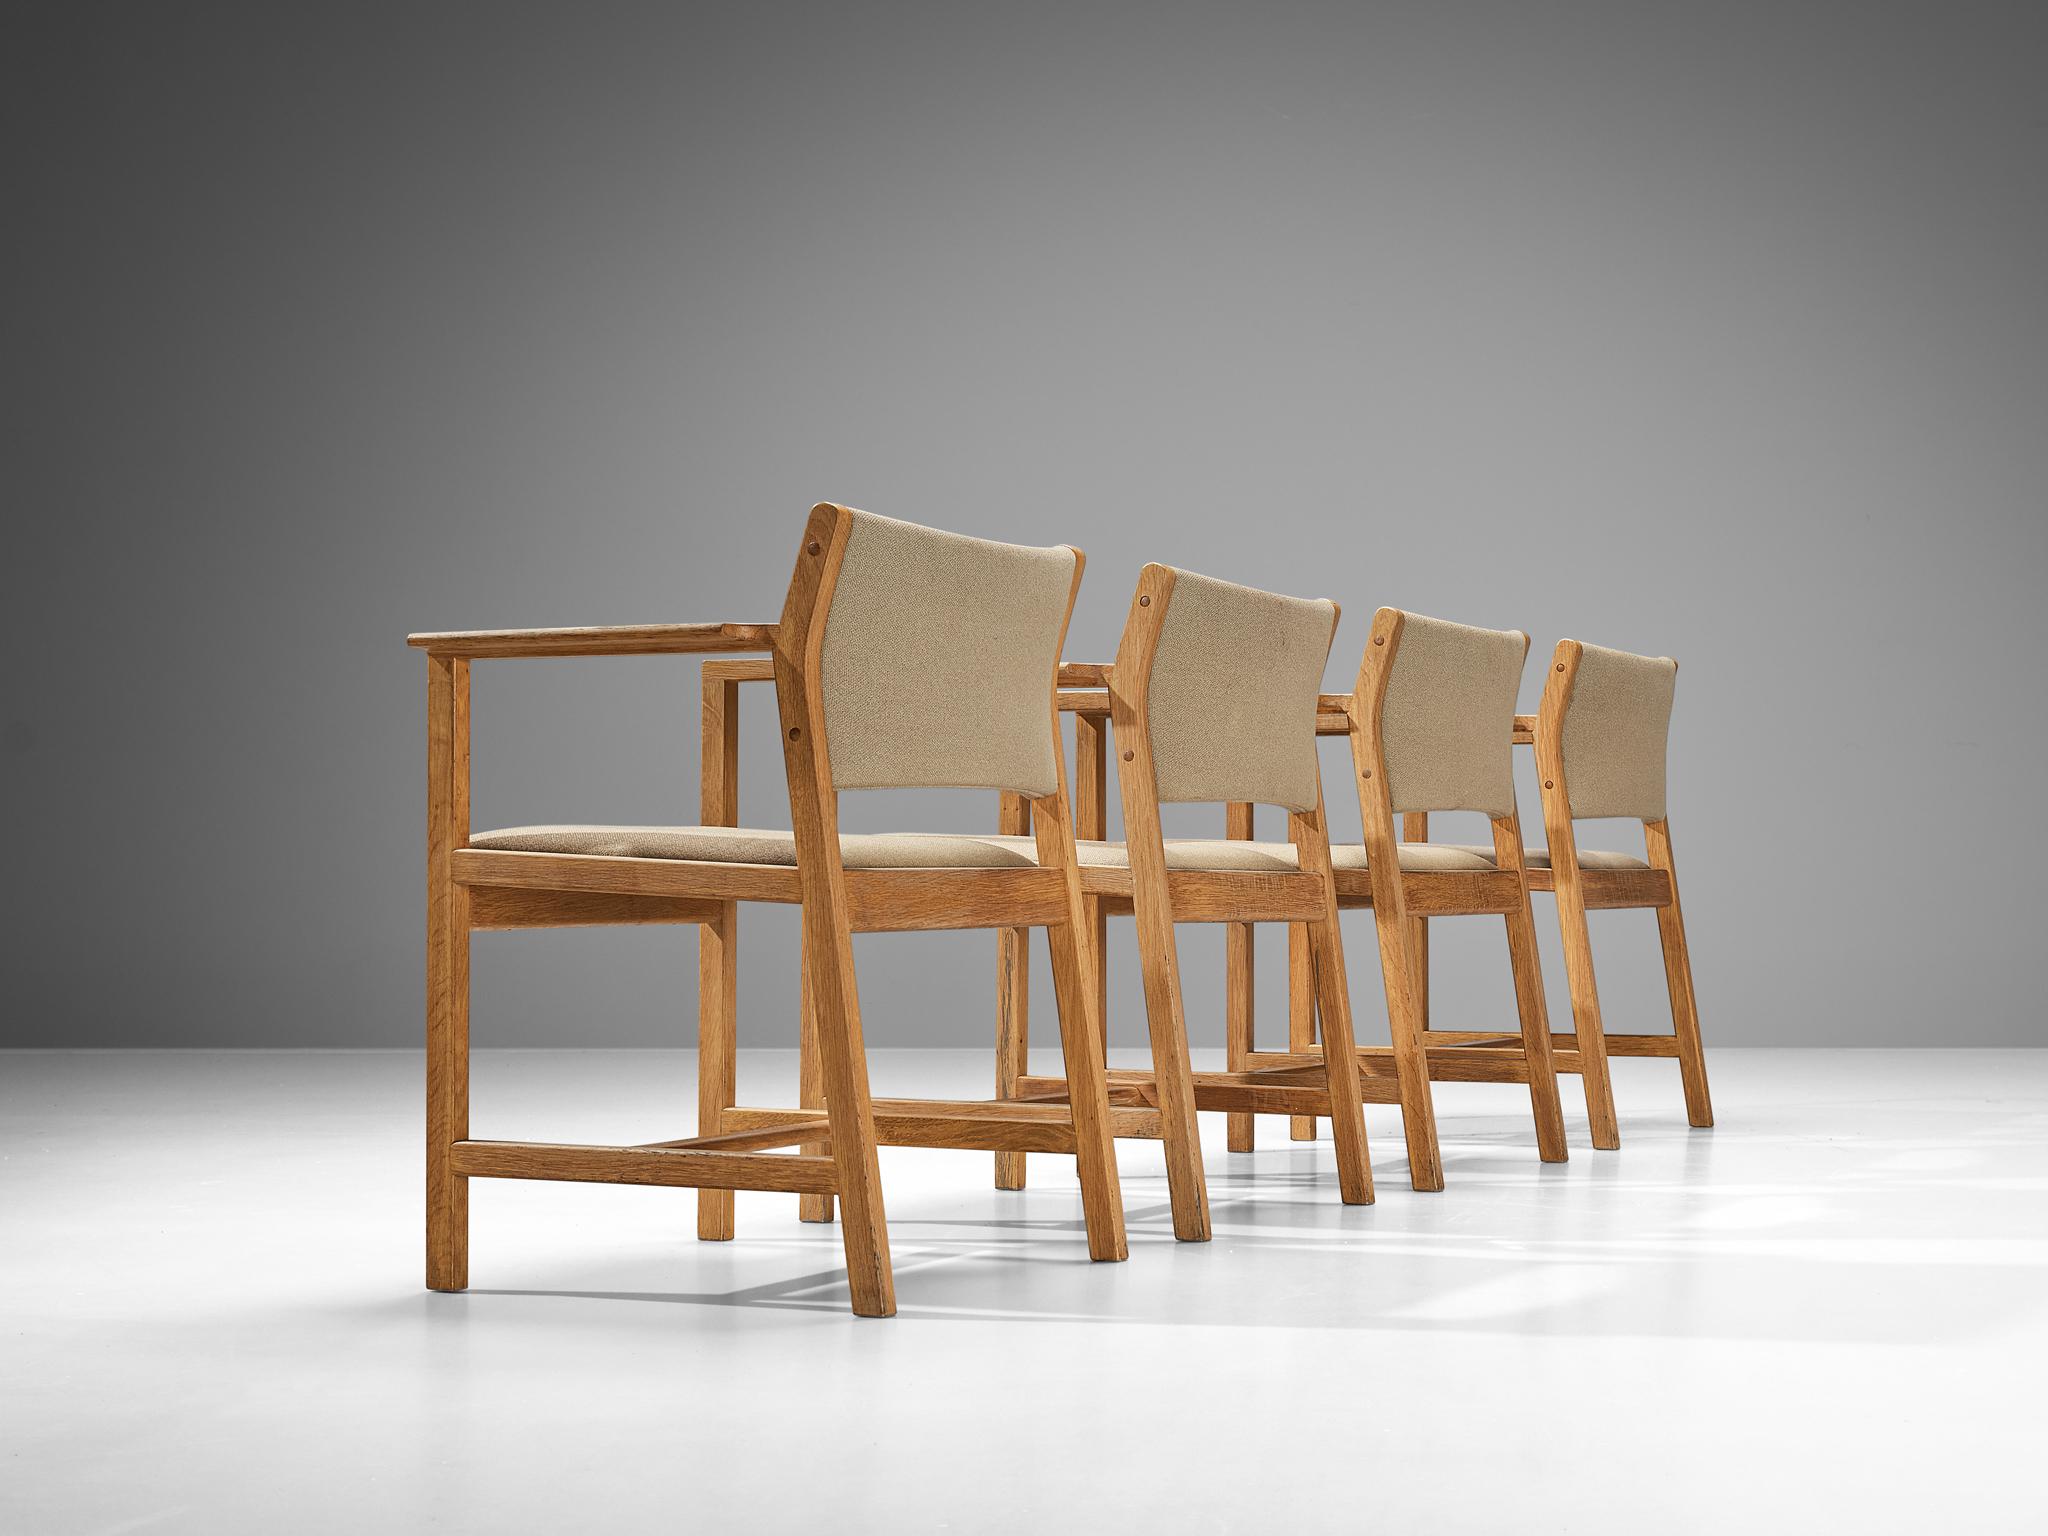 Staten Kontrol Møbler, armchairs, oak, fabric, Denmark, 1960s. 

Set of four Danish armchairs manufactured by Staten Kontrol Møbler. Theis model with a rounded seat has a characteristic, sculptural frame. The tilted rear legs with sharp edges create